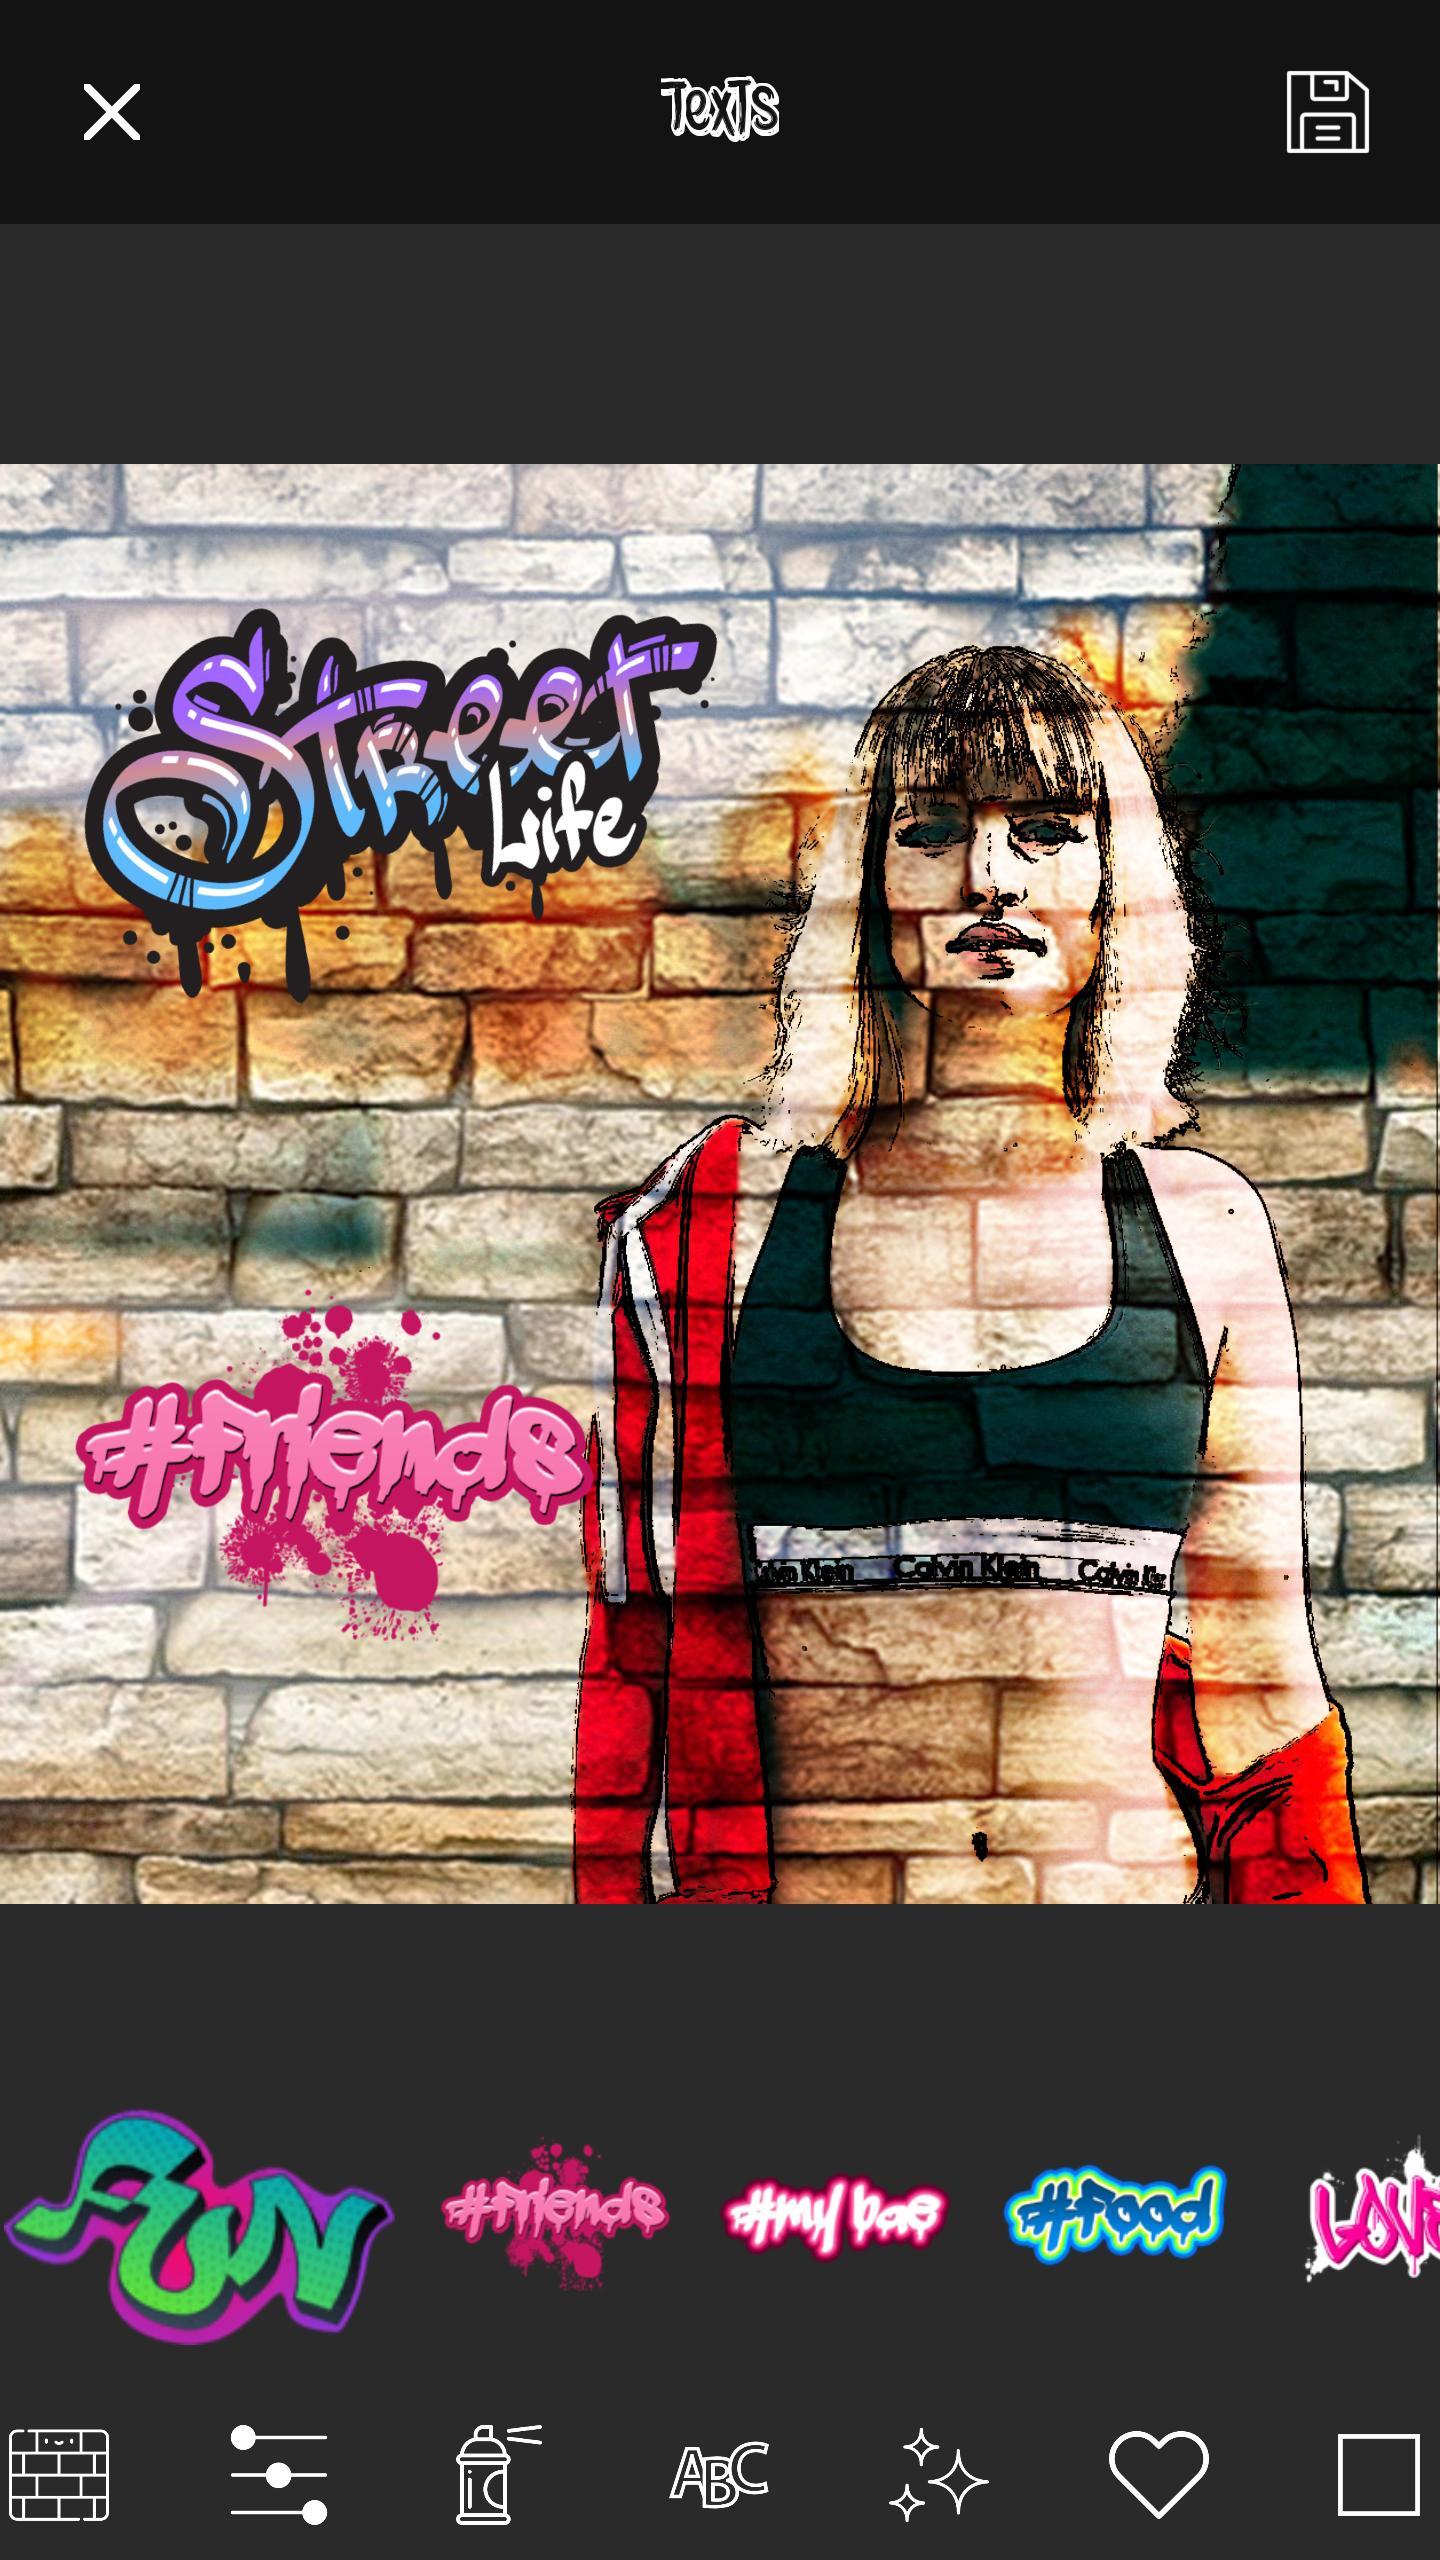 Graffiti Photo Editor For Android Apk Download